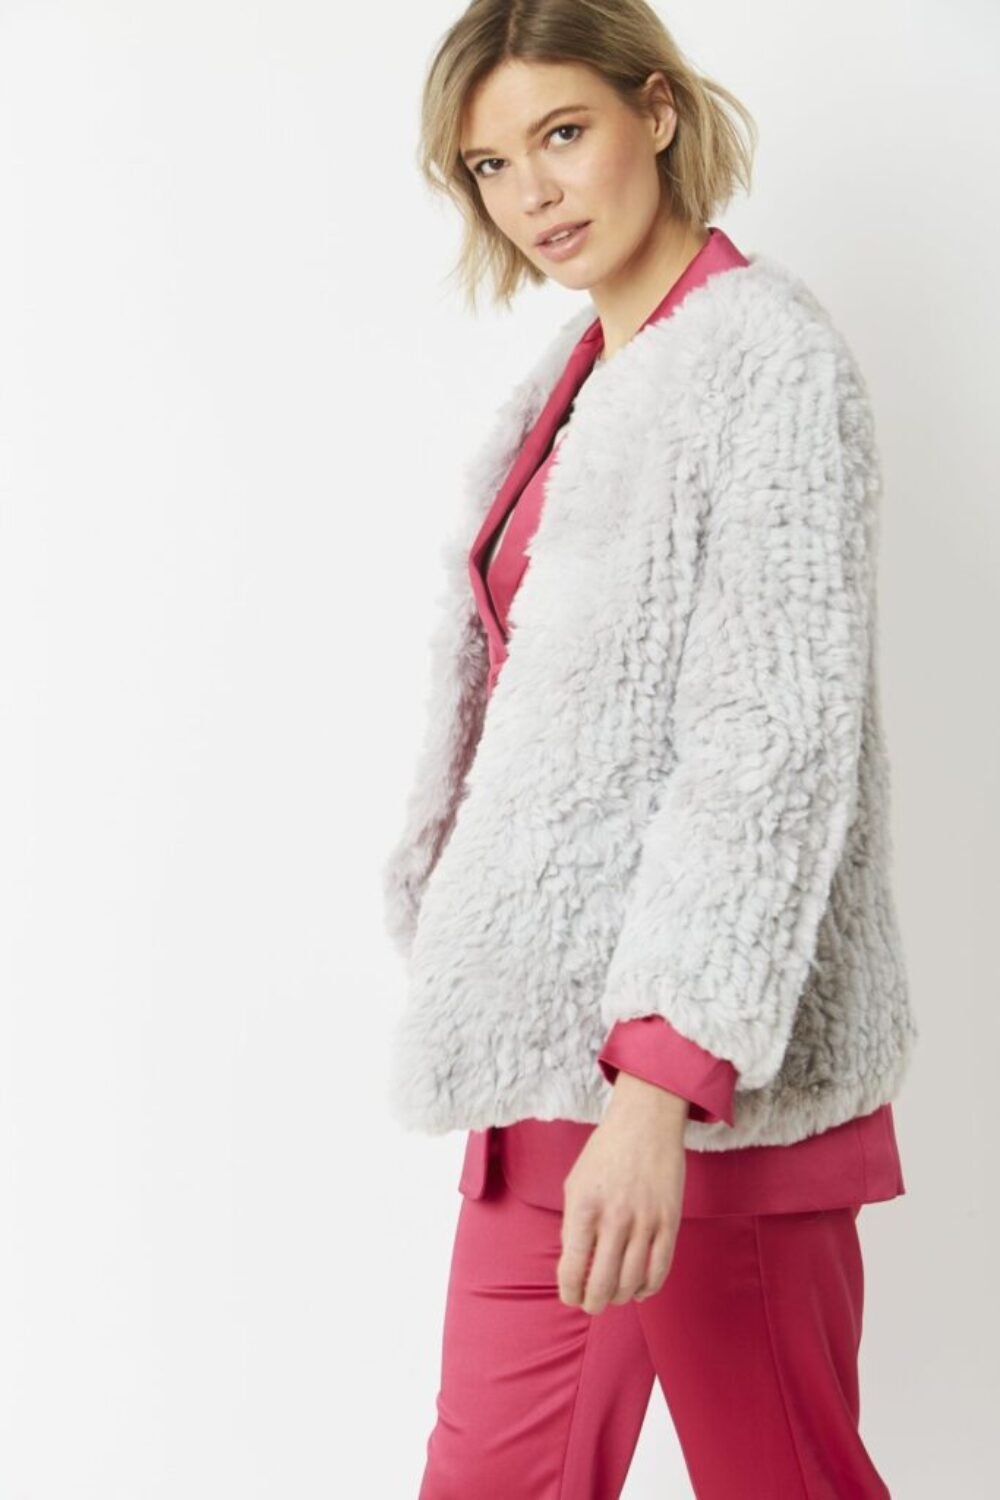 Shop Lux Grey Hand Knitted Faux Fur Coat and women's luxury and designer clothes at www.lux-apparel.co.uk